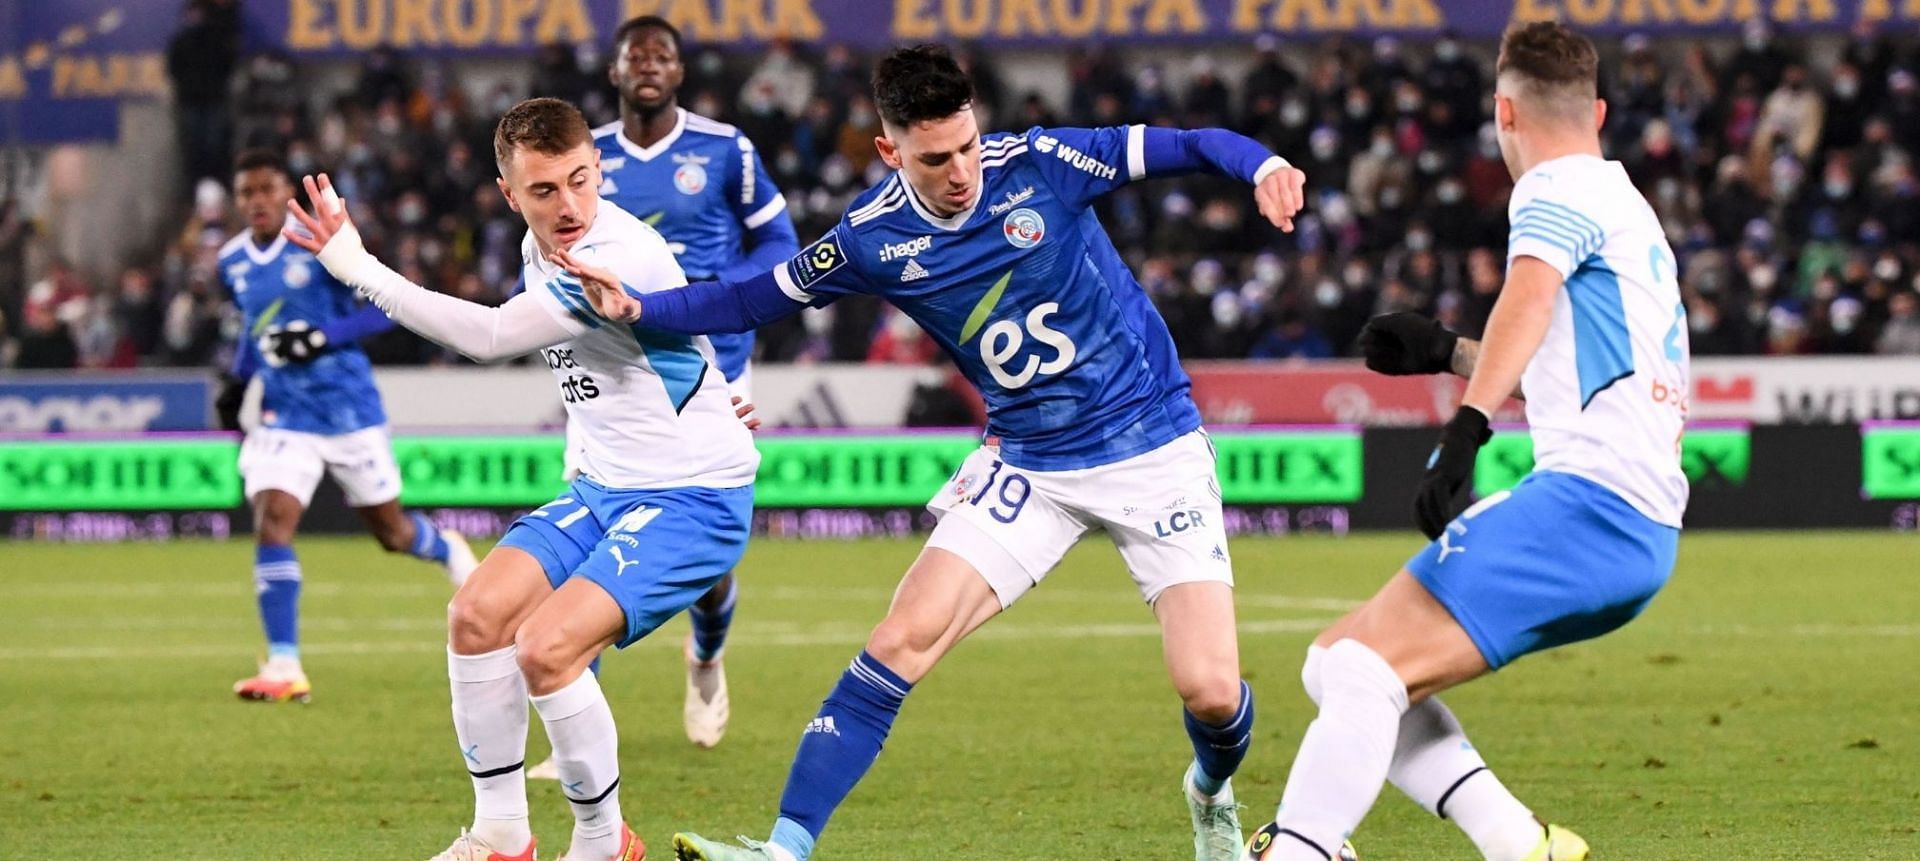 Strasbourg and Marseille meet in Ligue 1 on Saturday